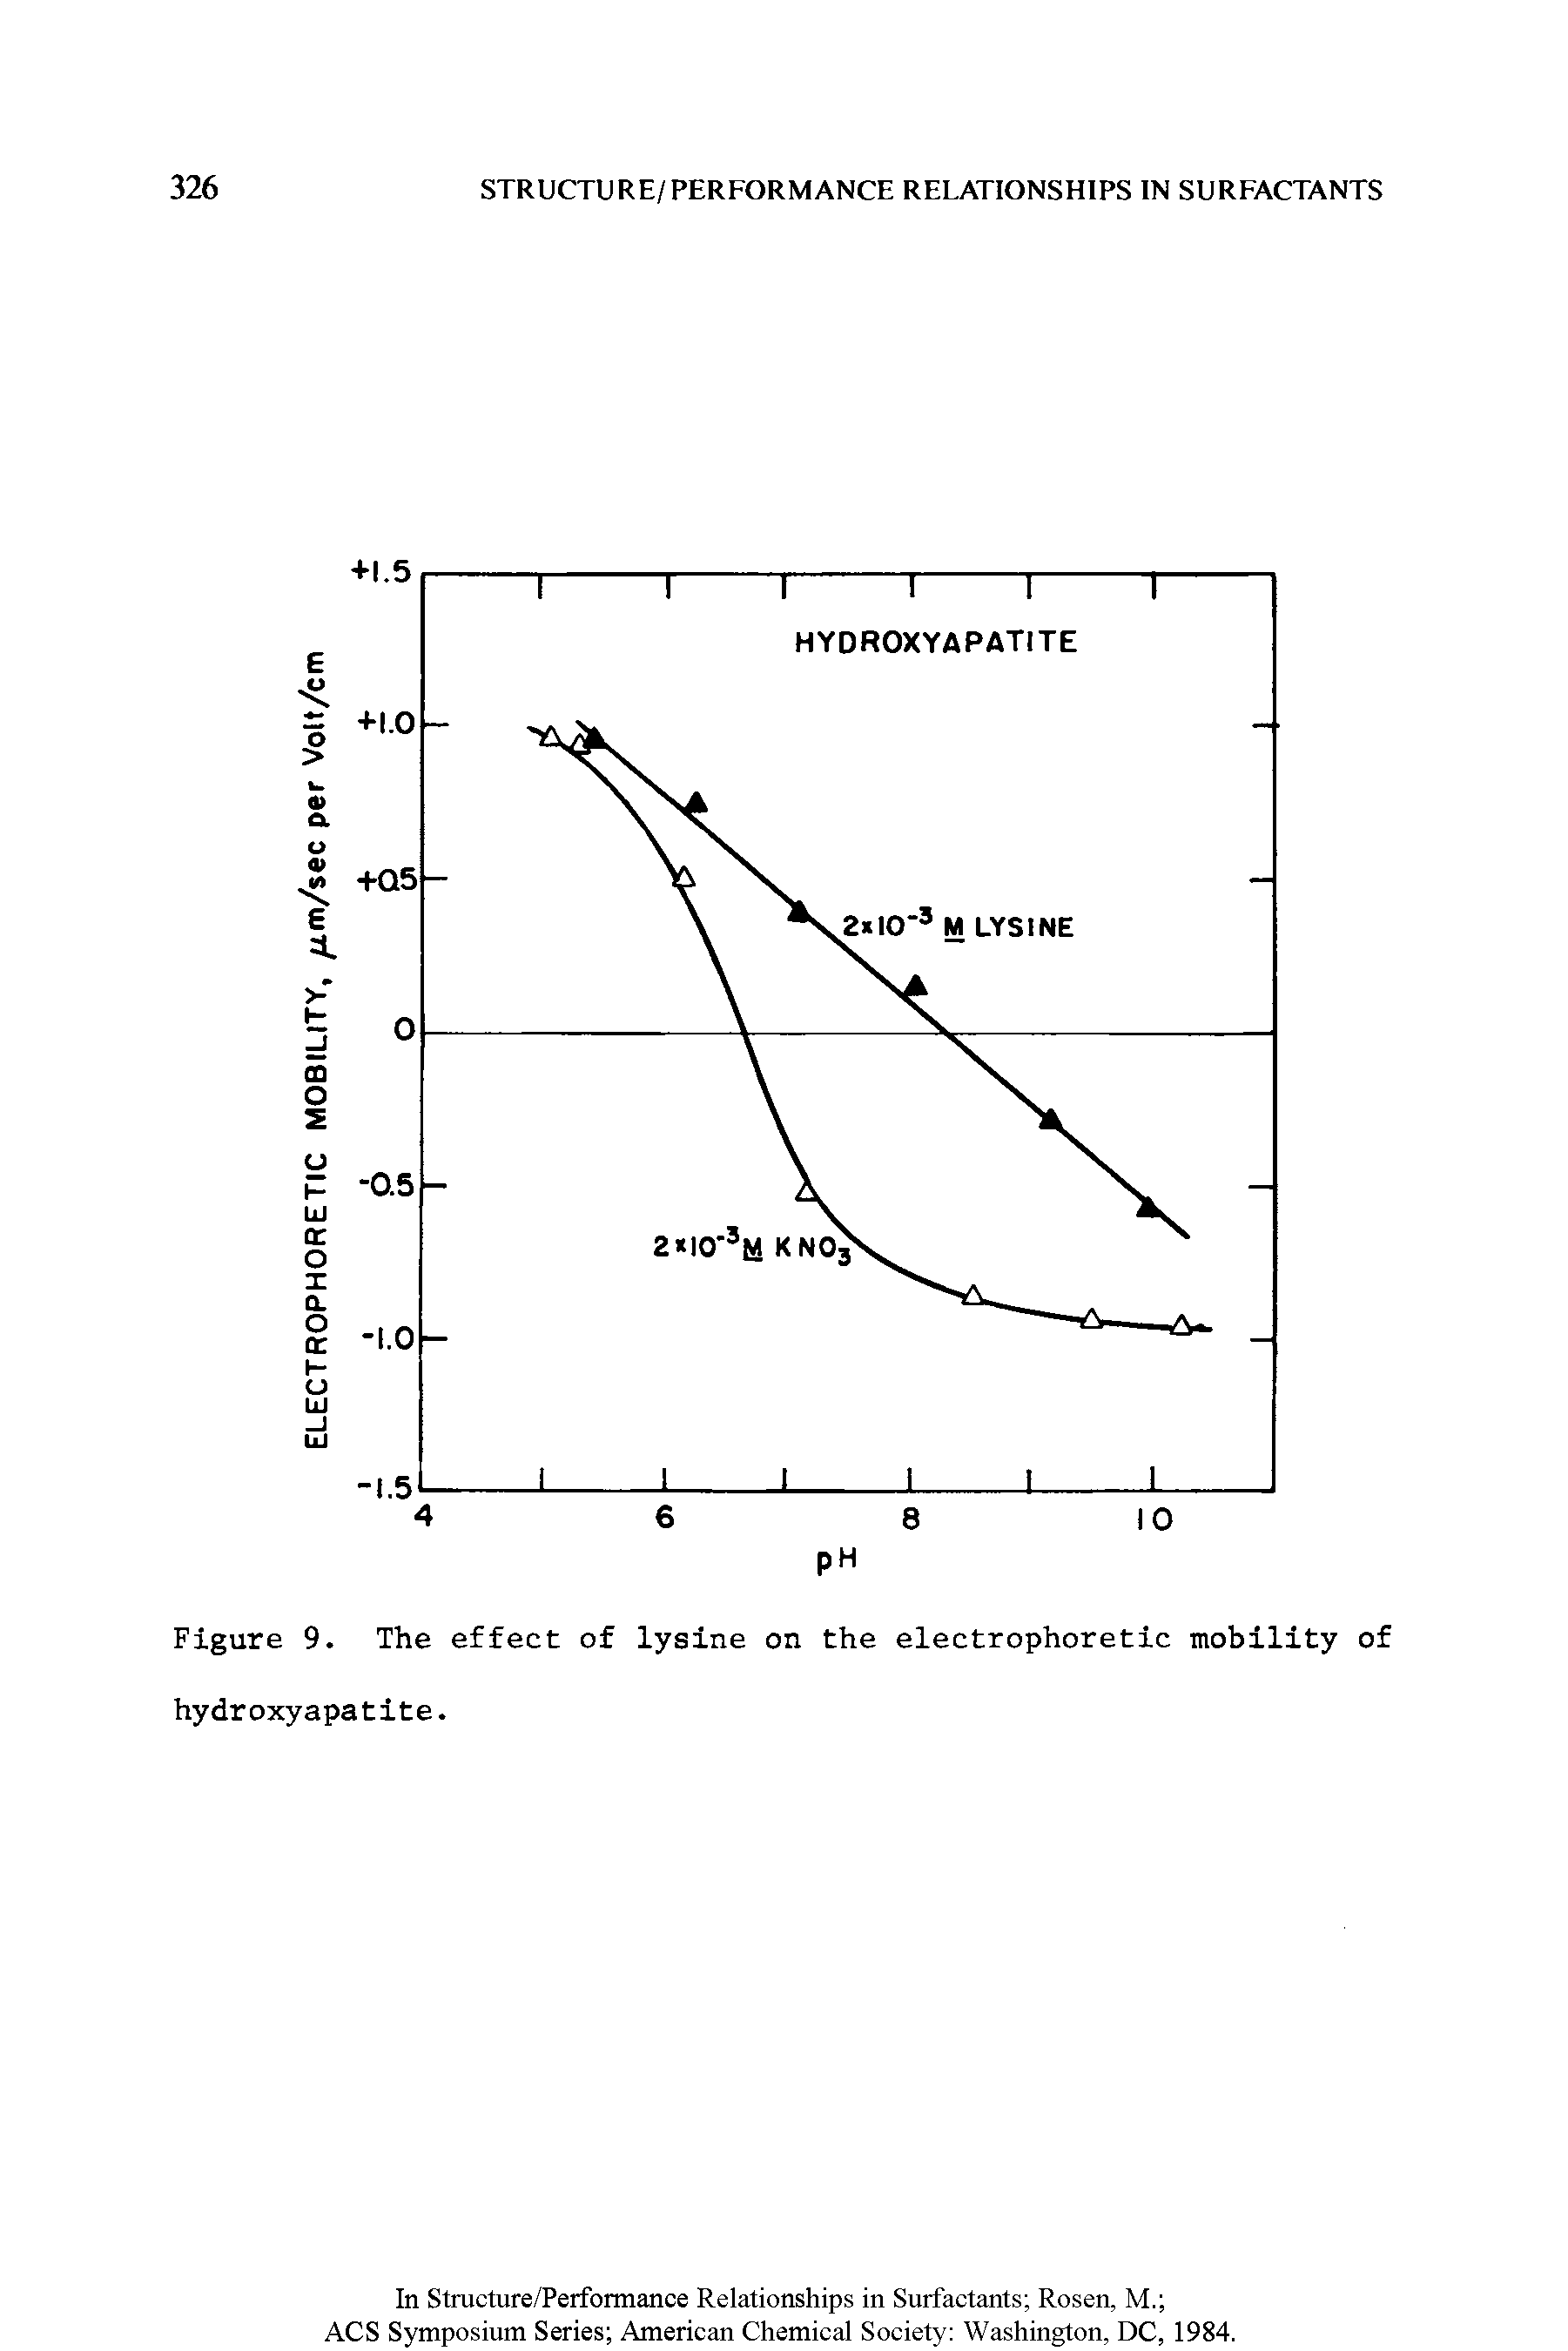 Figure 9. The effect of lysine on the electrophoretic mobility of hydroxyapatite.